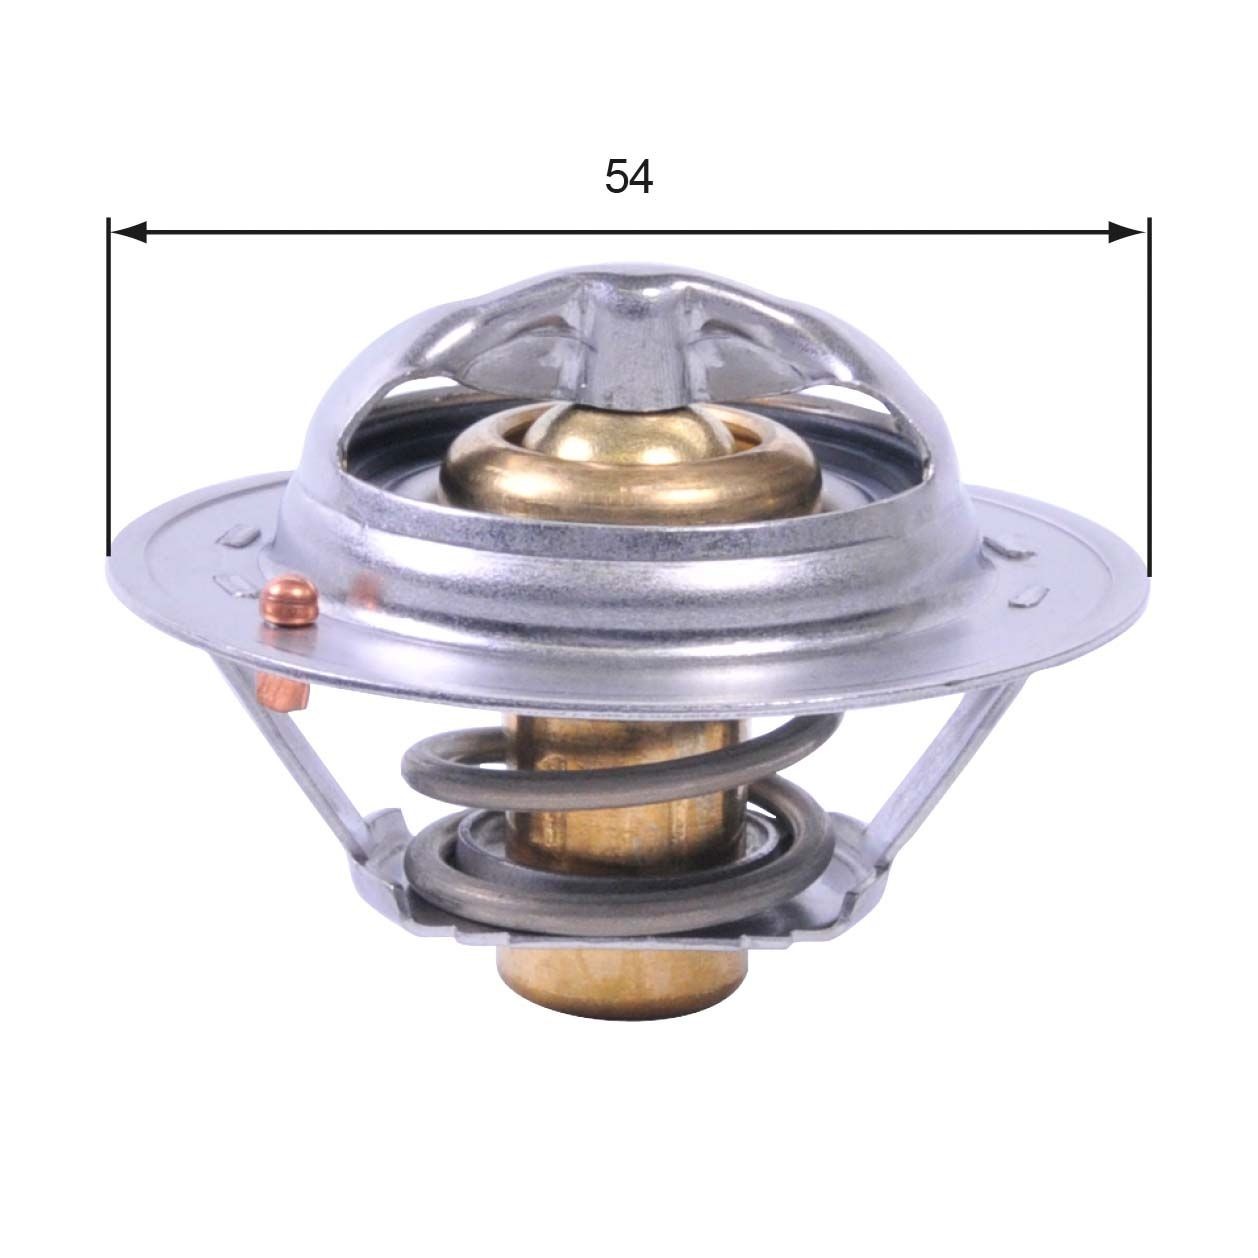 GATES TH43182G1 Engine thermostat Opening Temperature: 82°C, with gaskets/seals, without housing